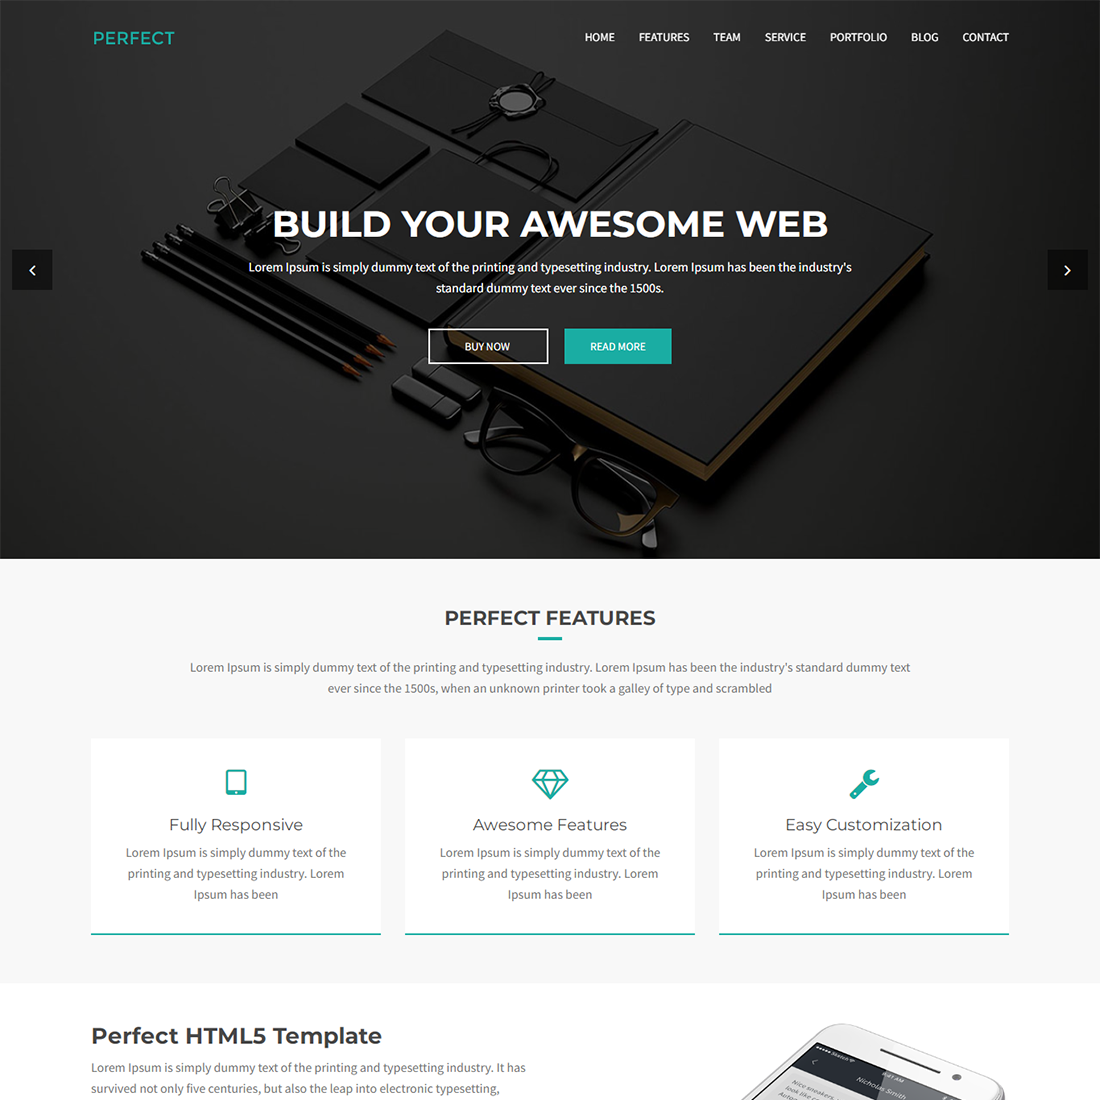 Corporate Business Website HTML Template cover image.